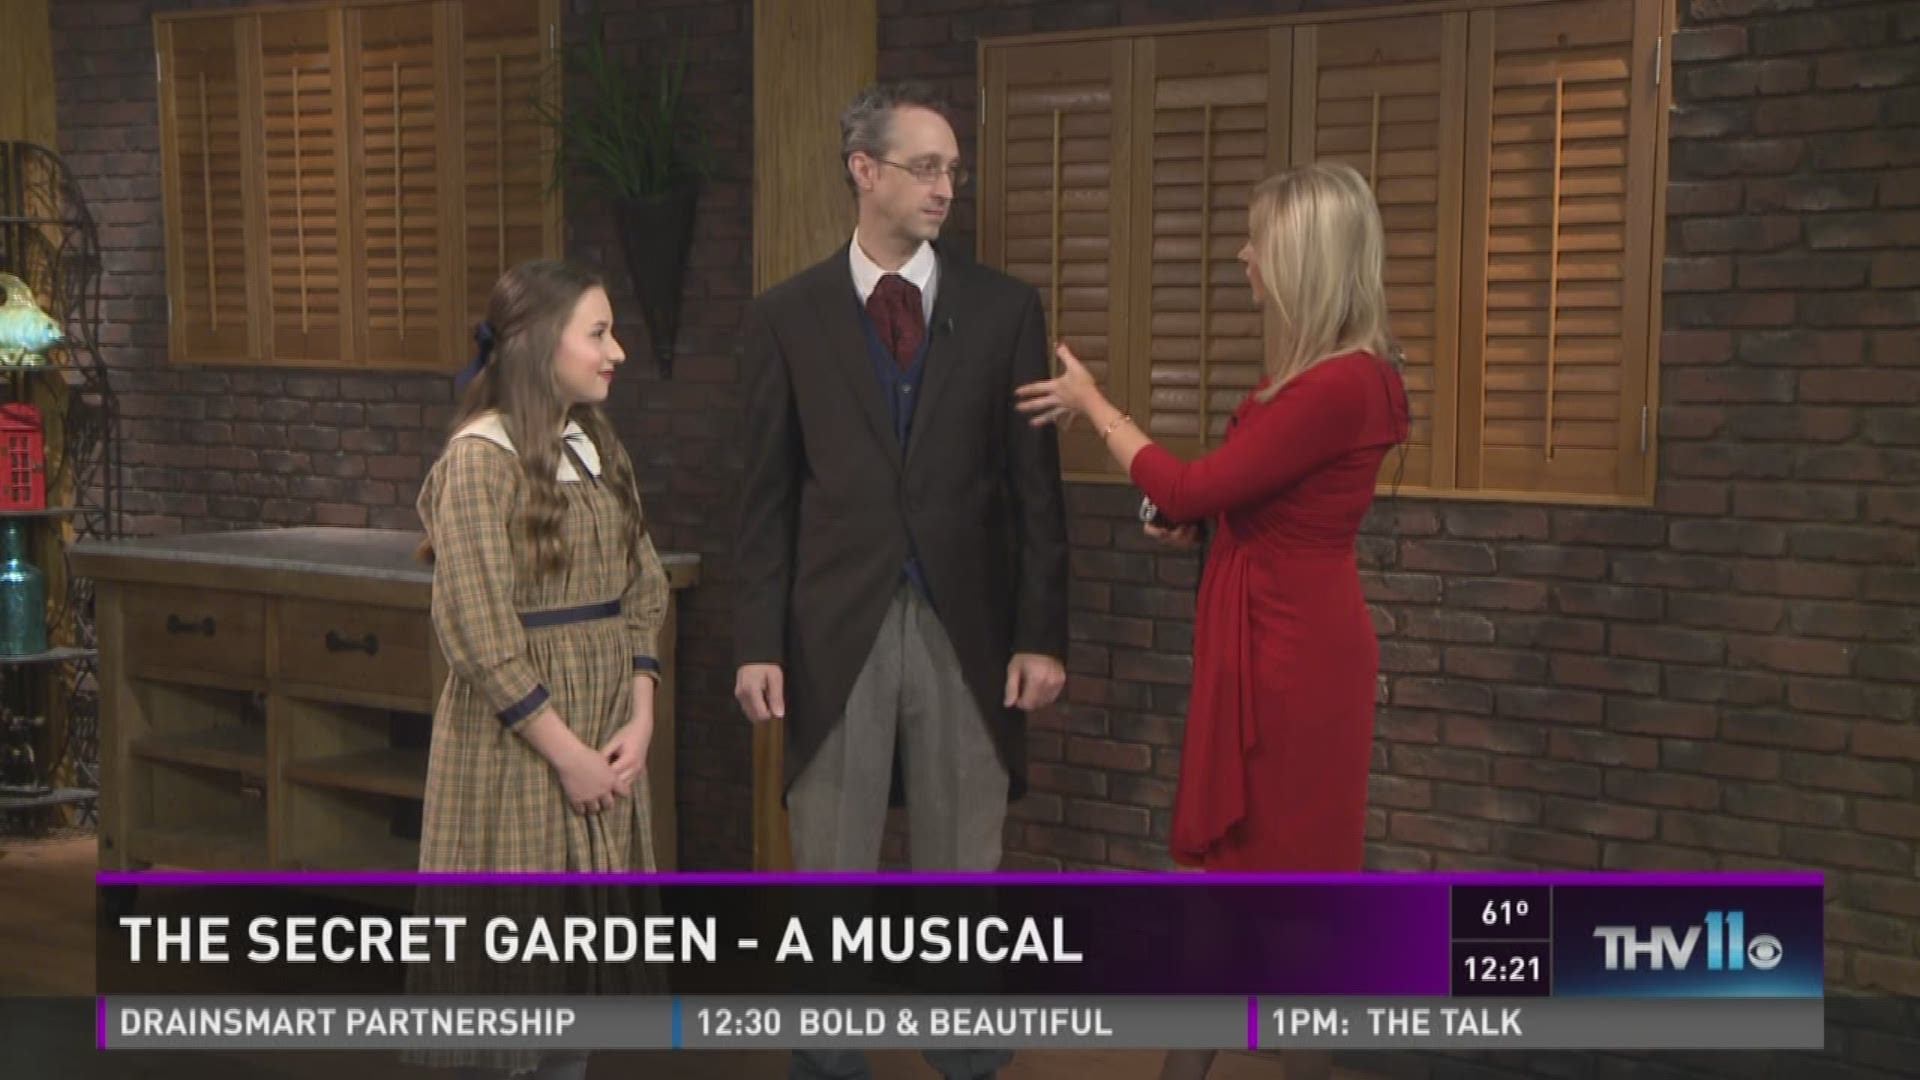 Actors James Norris and Grace Pitts joined THV11 at Noon with details on the Secret Garden musical